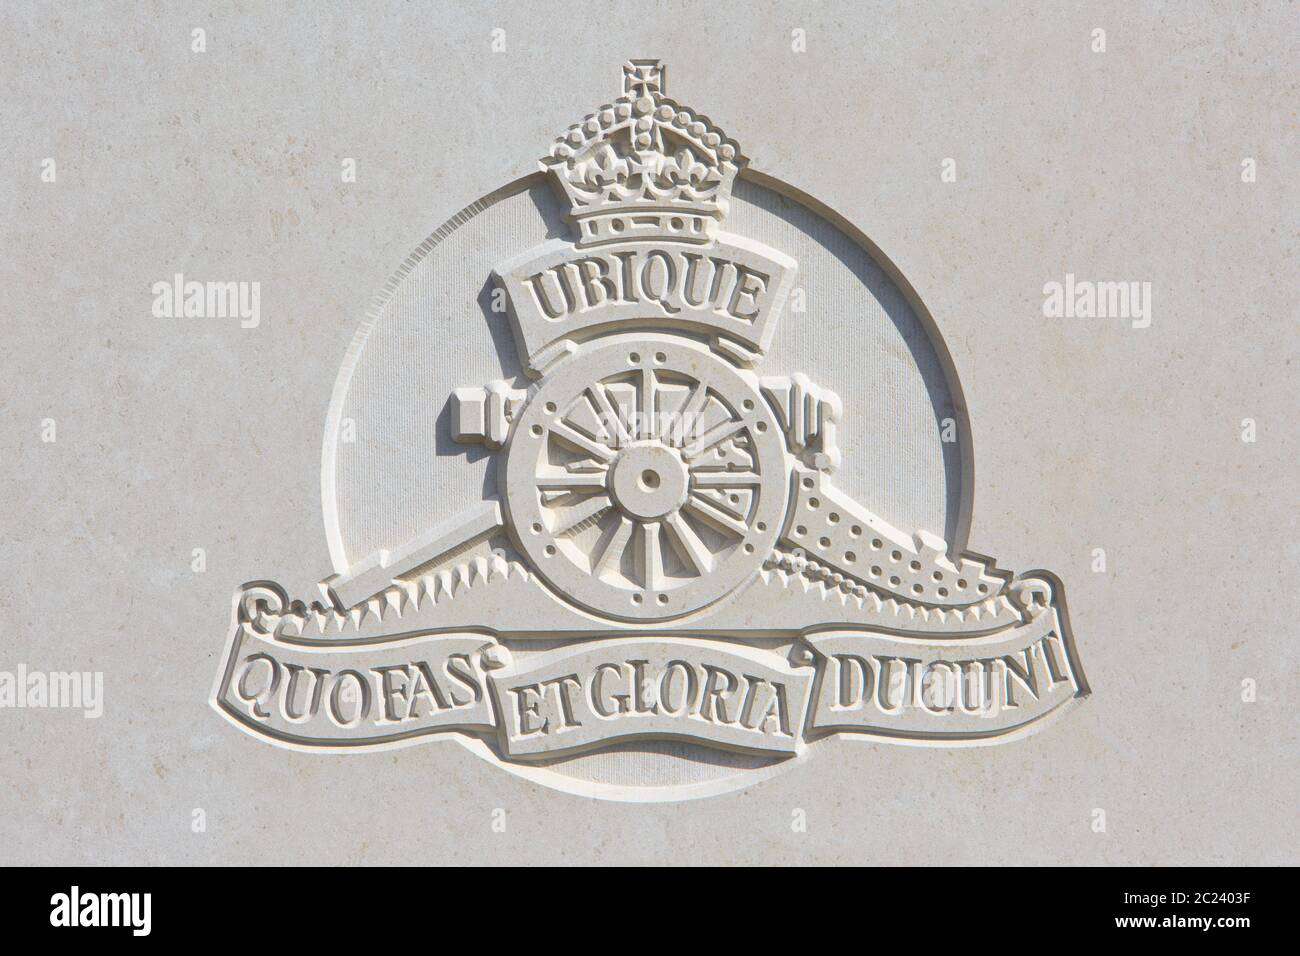 The Royal Field Artillery (1899-1924) regimental emblem on a World War I headstone at Bedford House Cemetery in Zillebeke, Belgium Stock Photo